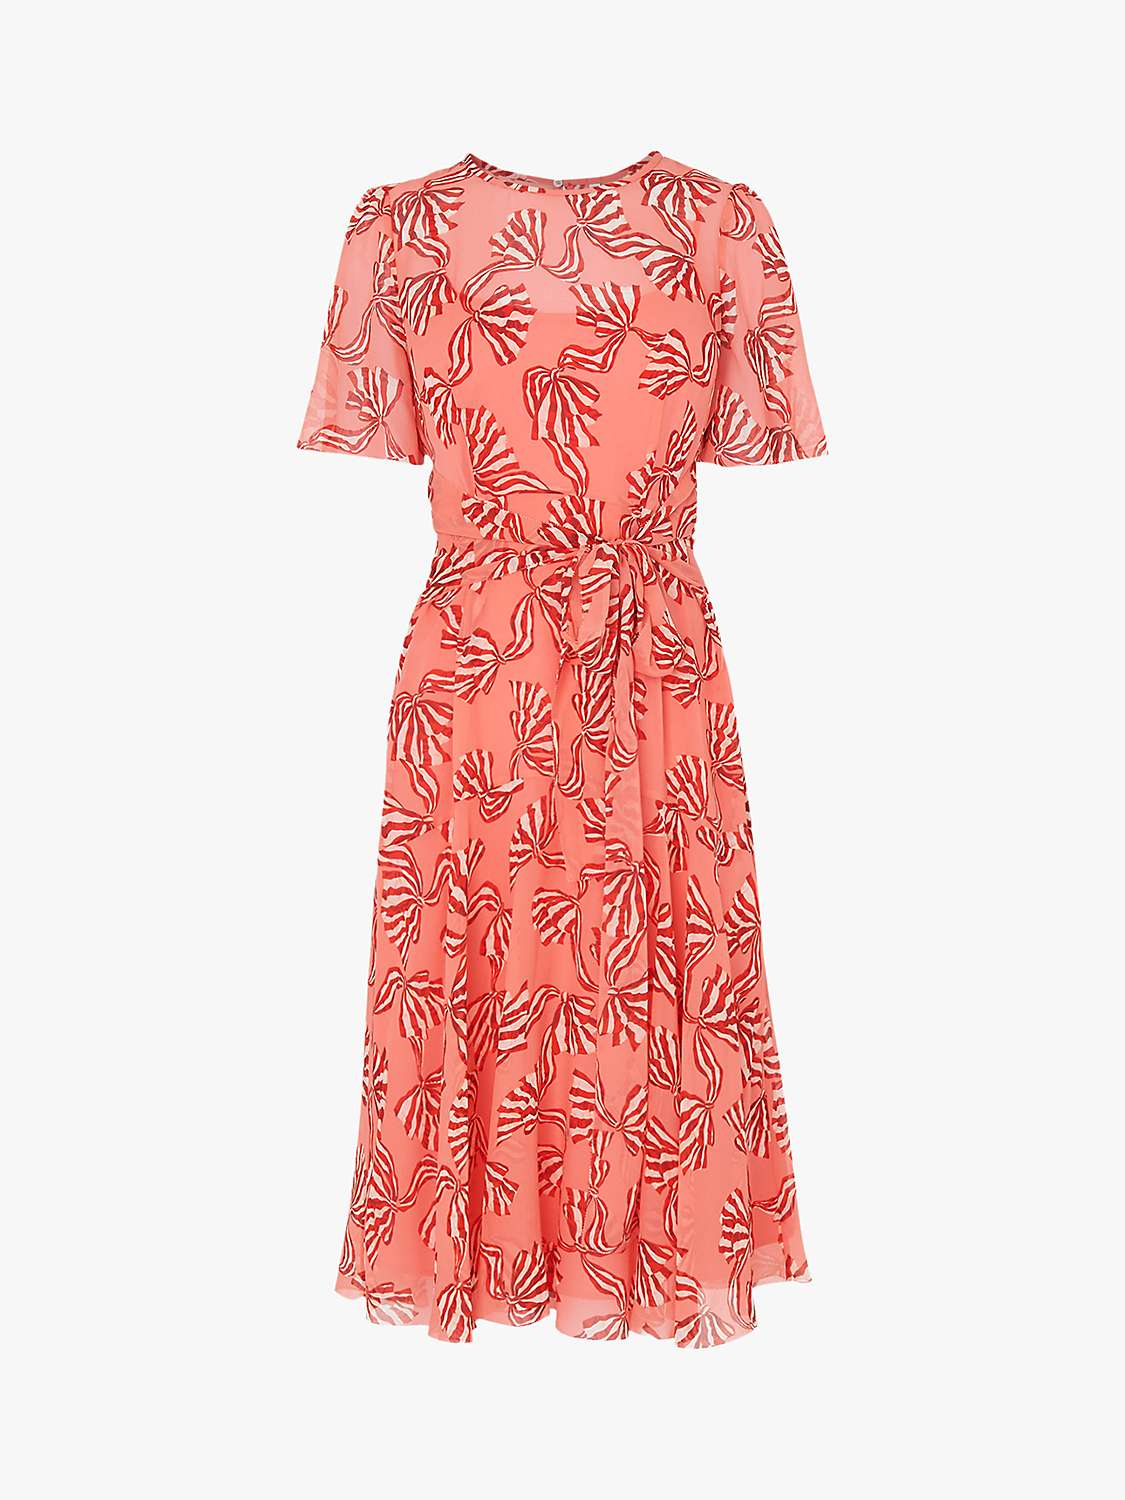 Cool dresses for hot weather | lady.co.uk